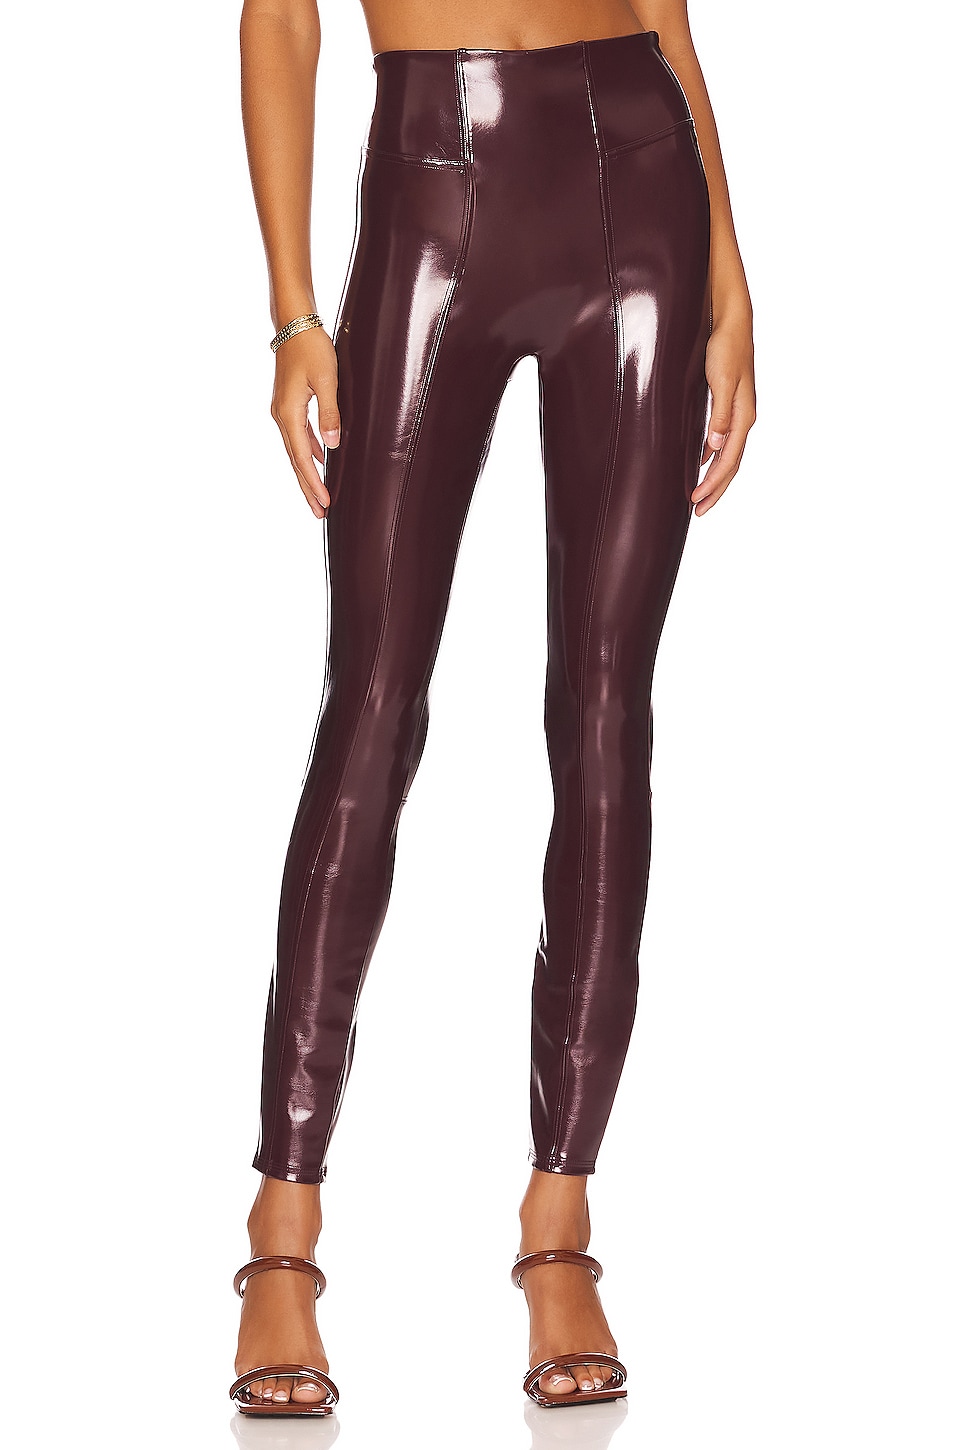 Леггинсы SPANX Faux Patent Leather, цвет Ruby